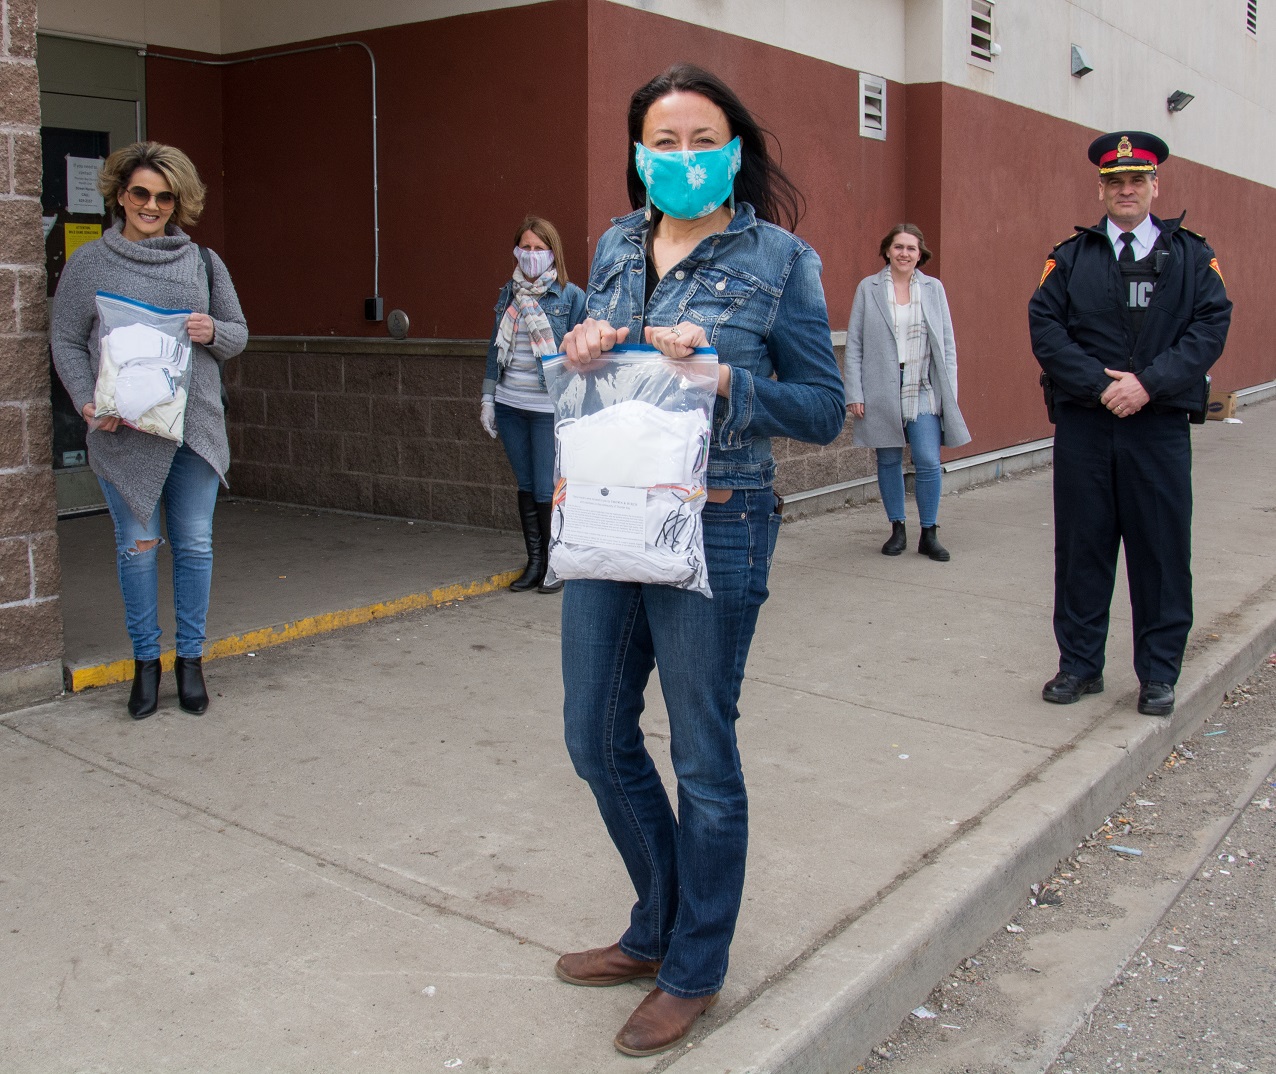 Crown & Birch donate protective masks to Shelter House with TBPS support